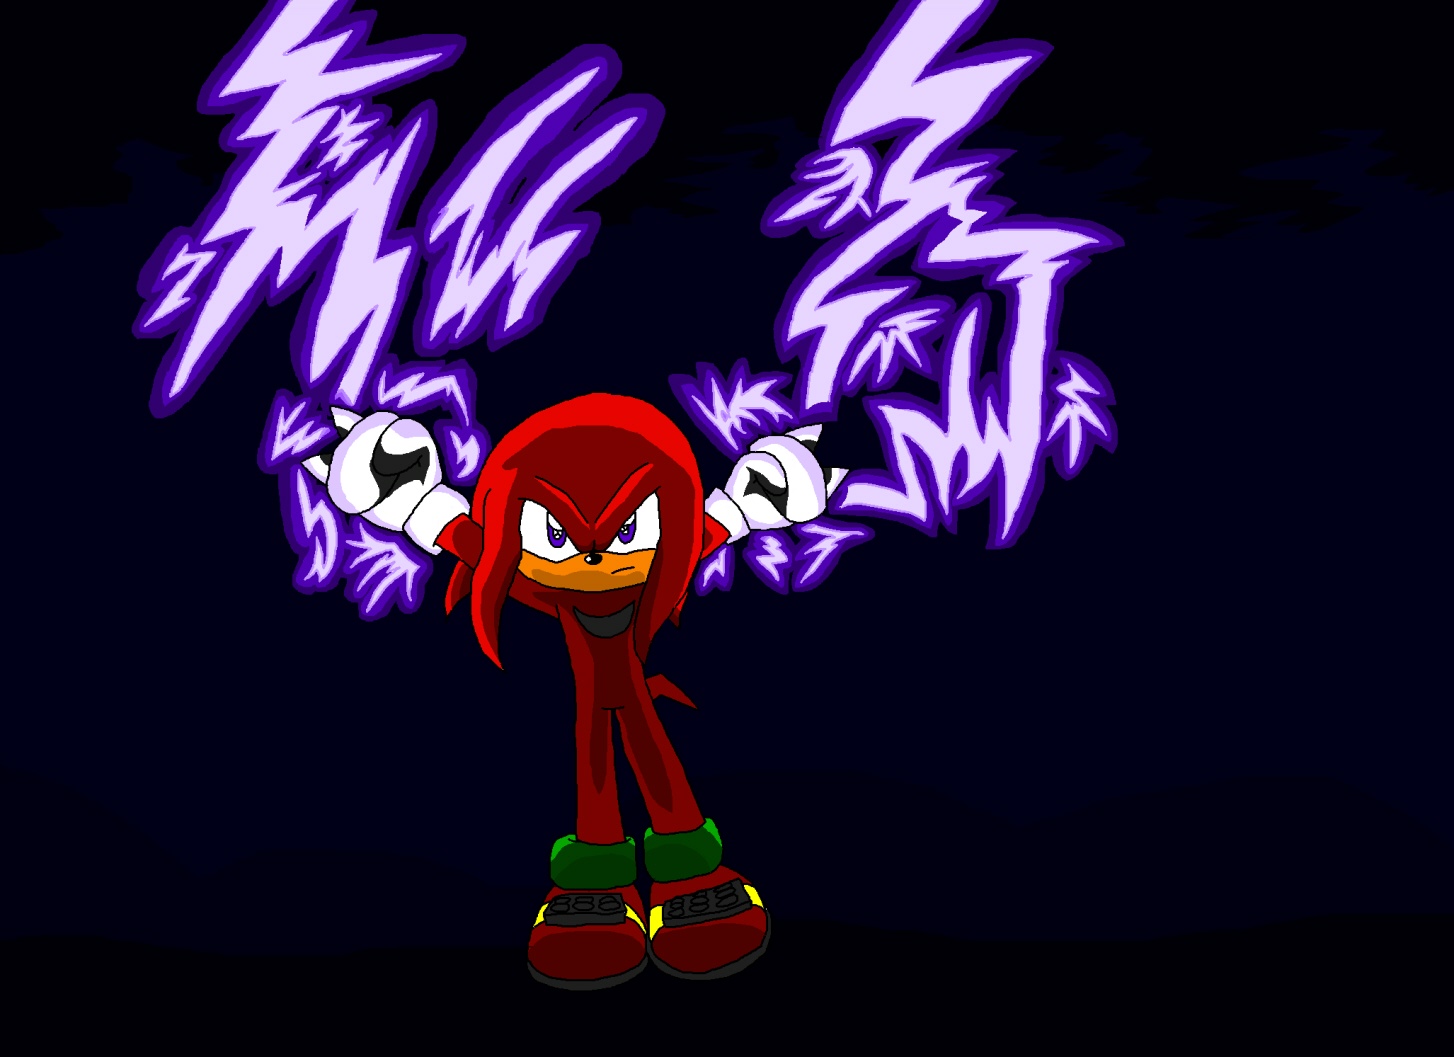 Lighning Has No Effect (Knuckles) by knux_and_rouge_fan